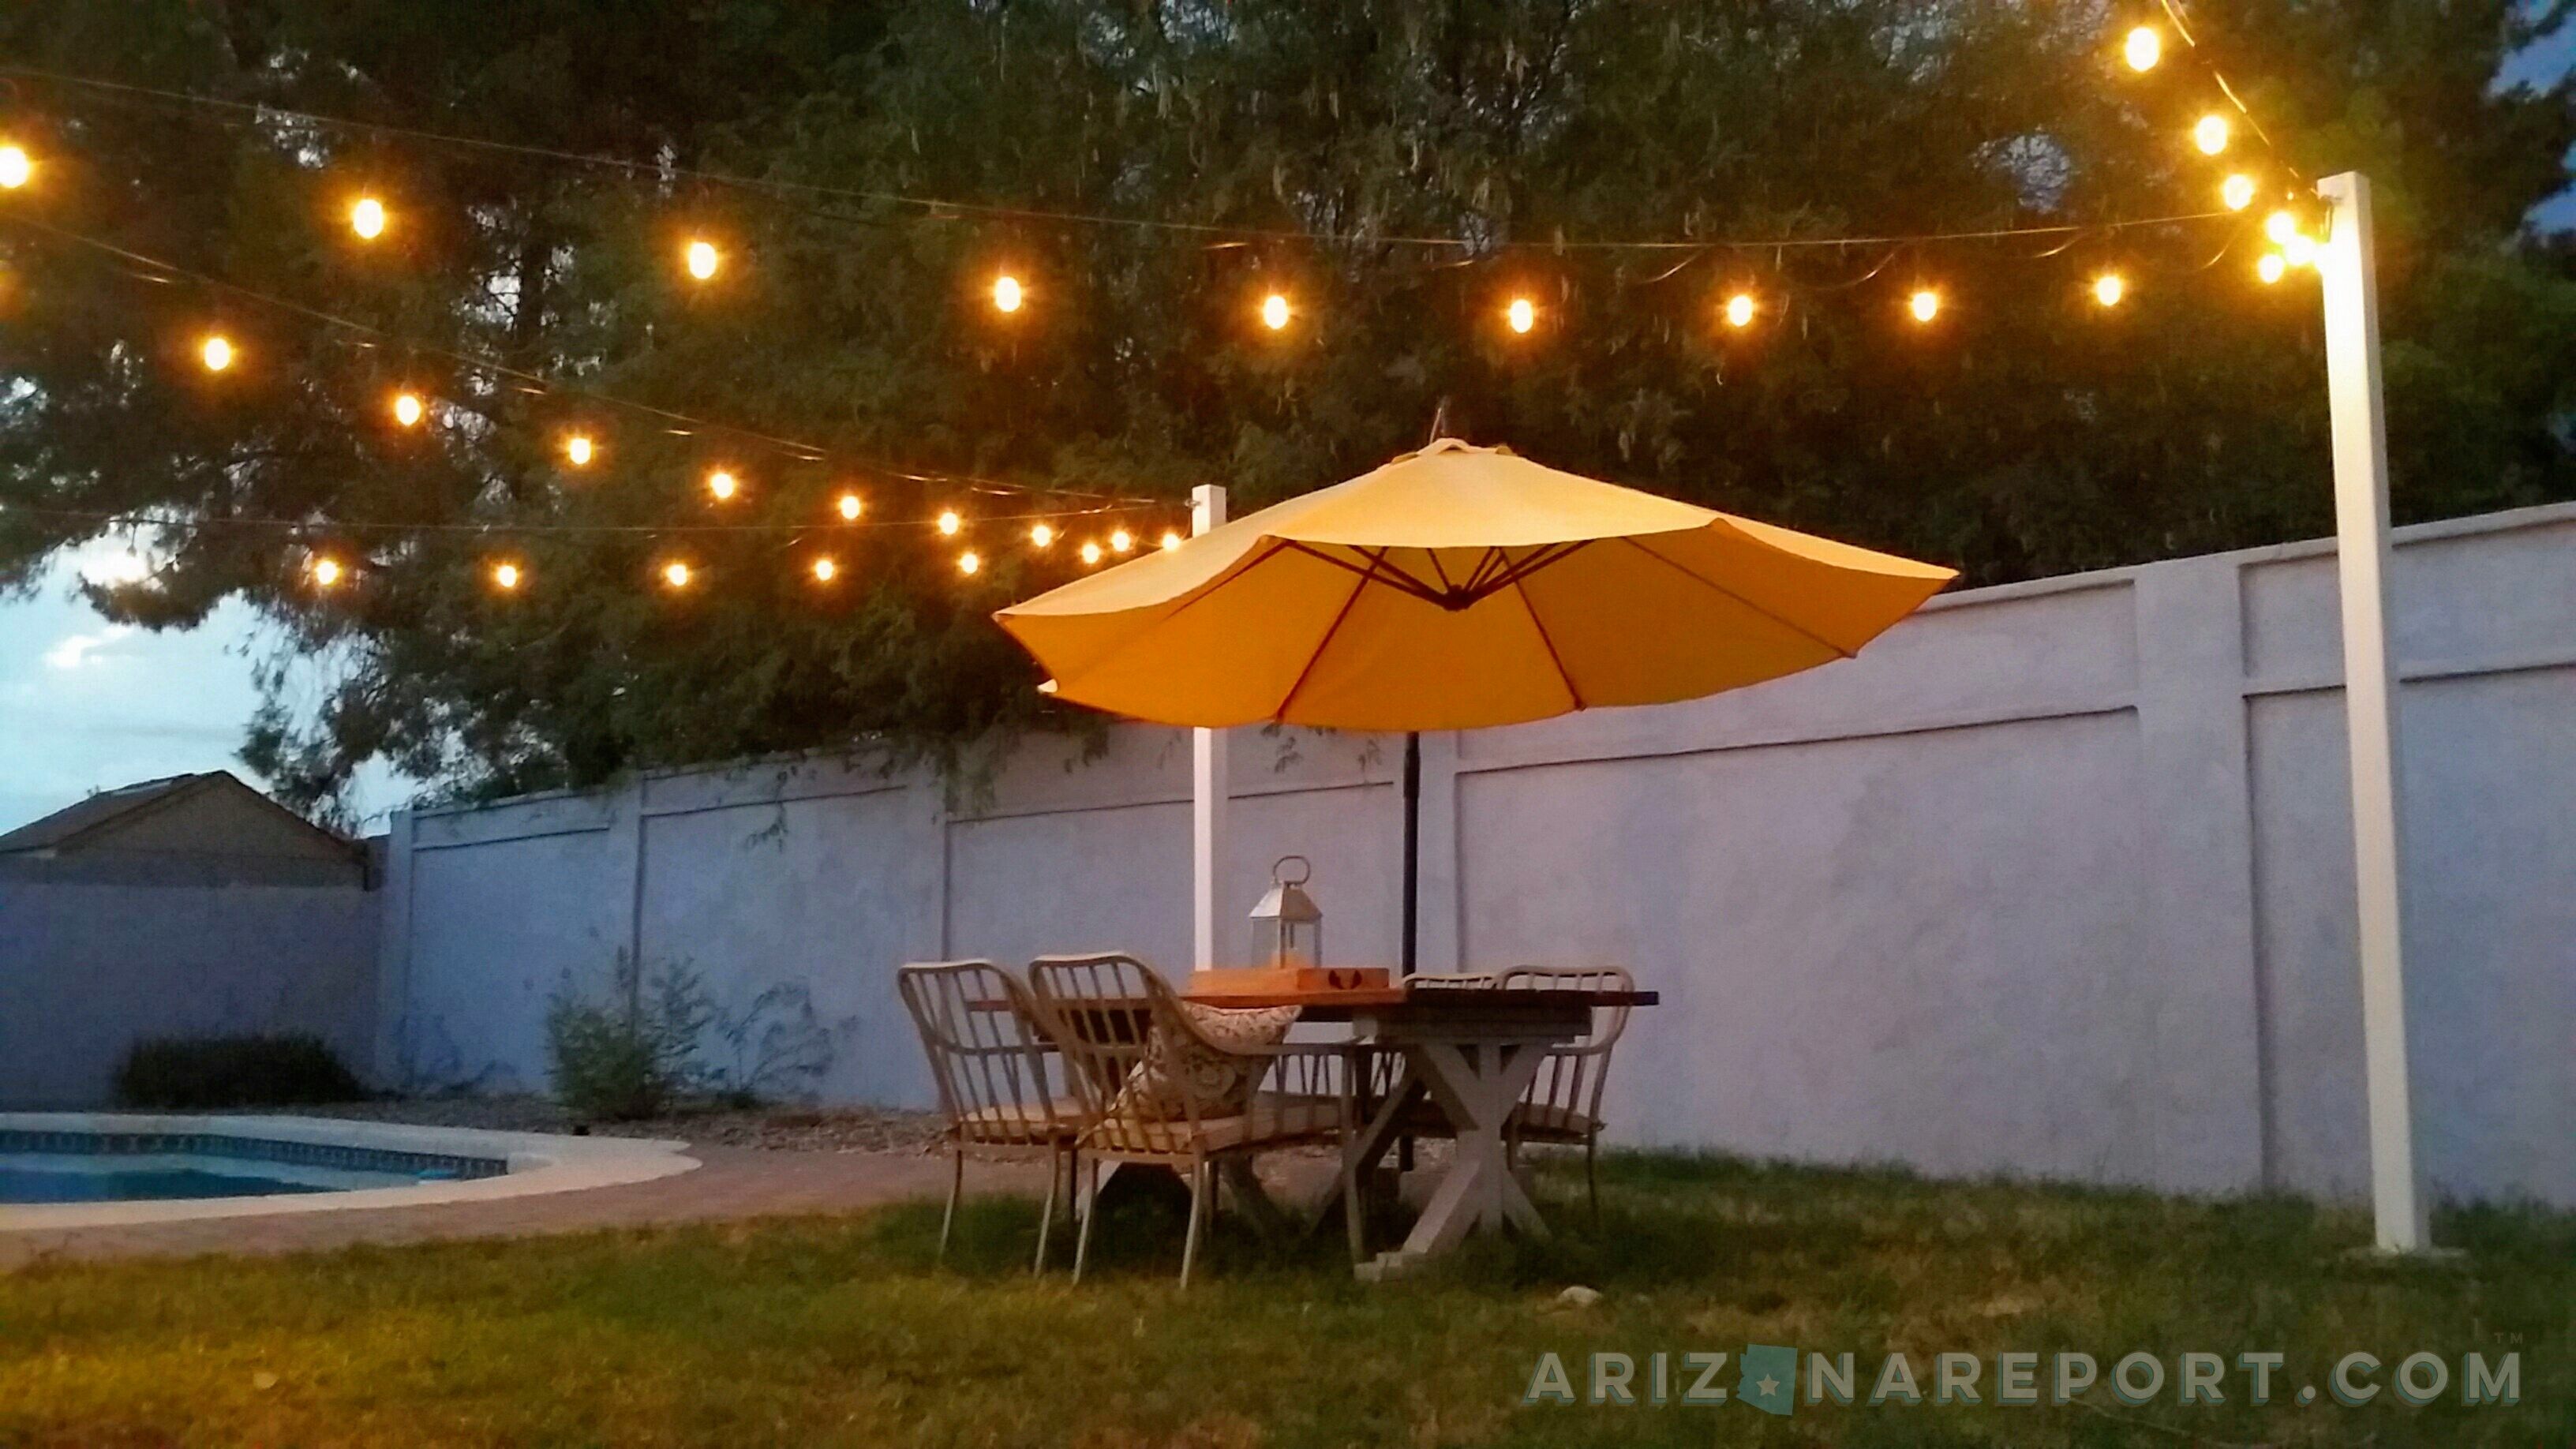 How To Hang String Lights And Cafe Lights | The Arizona Report™ With Hanging Outdoor Rope Lights (View 15 of 15)